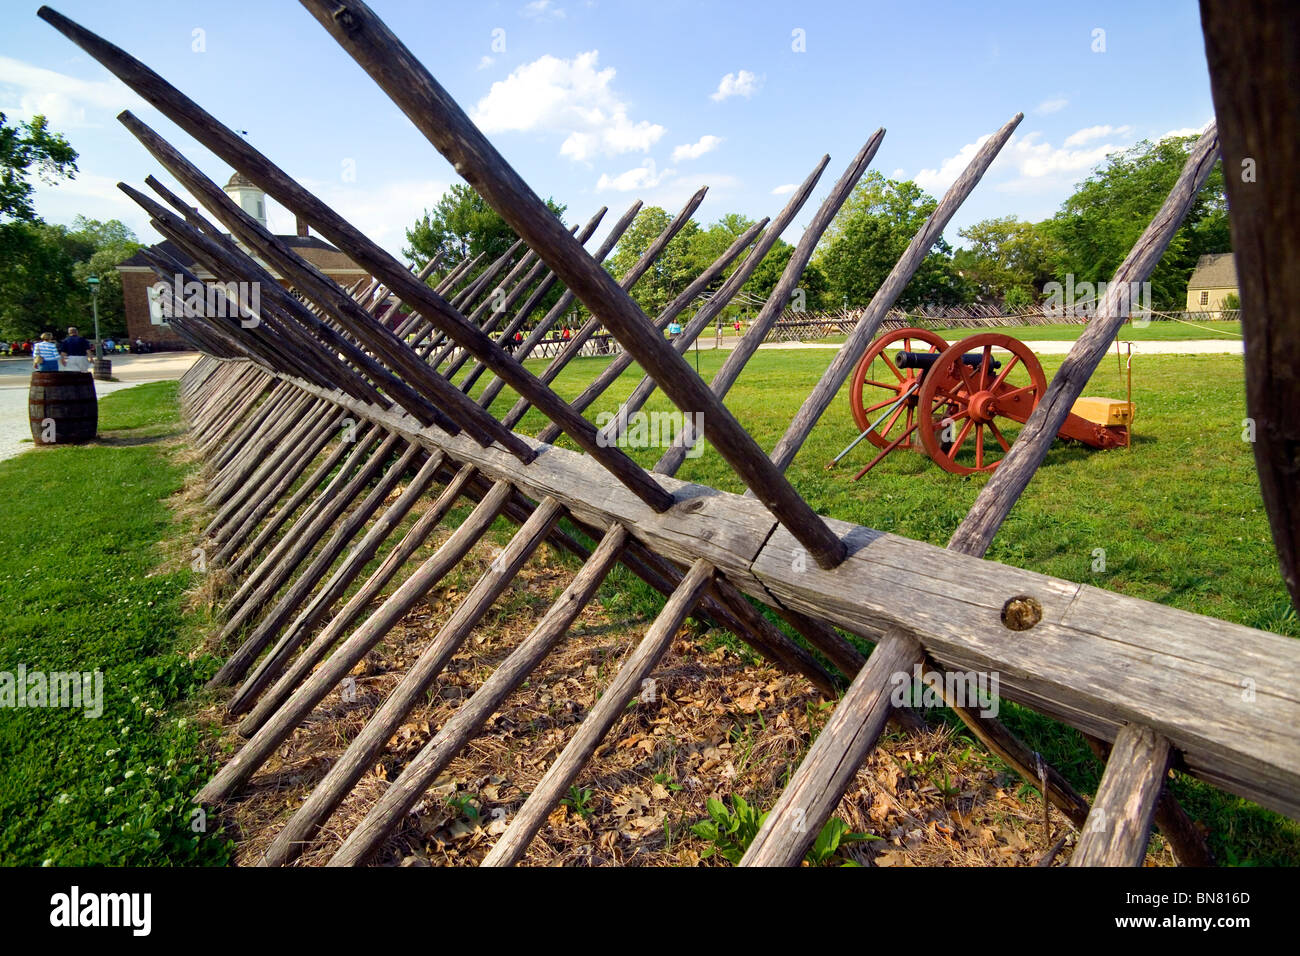 Wooden spike fences and cannon are among military defenses of the 18th Century than can be seen at historic Colonial Williamsburg in Virginia, USA. Stock Photo